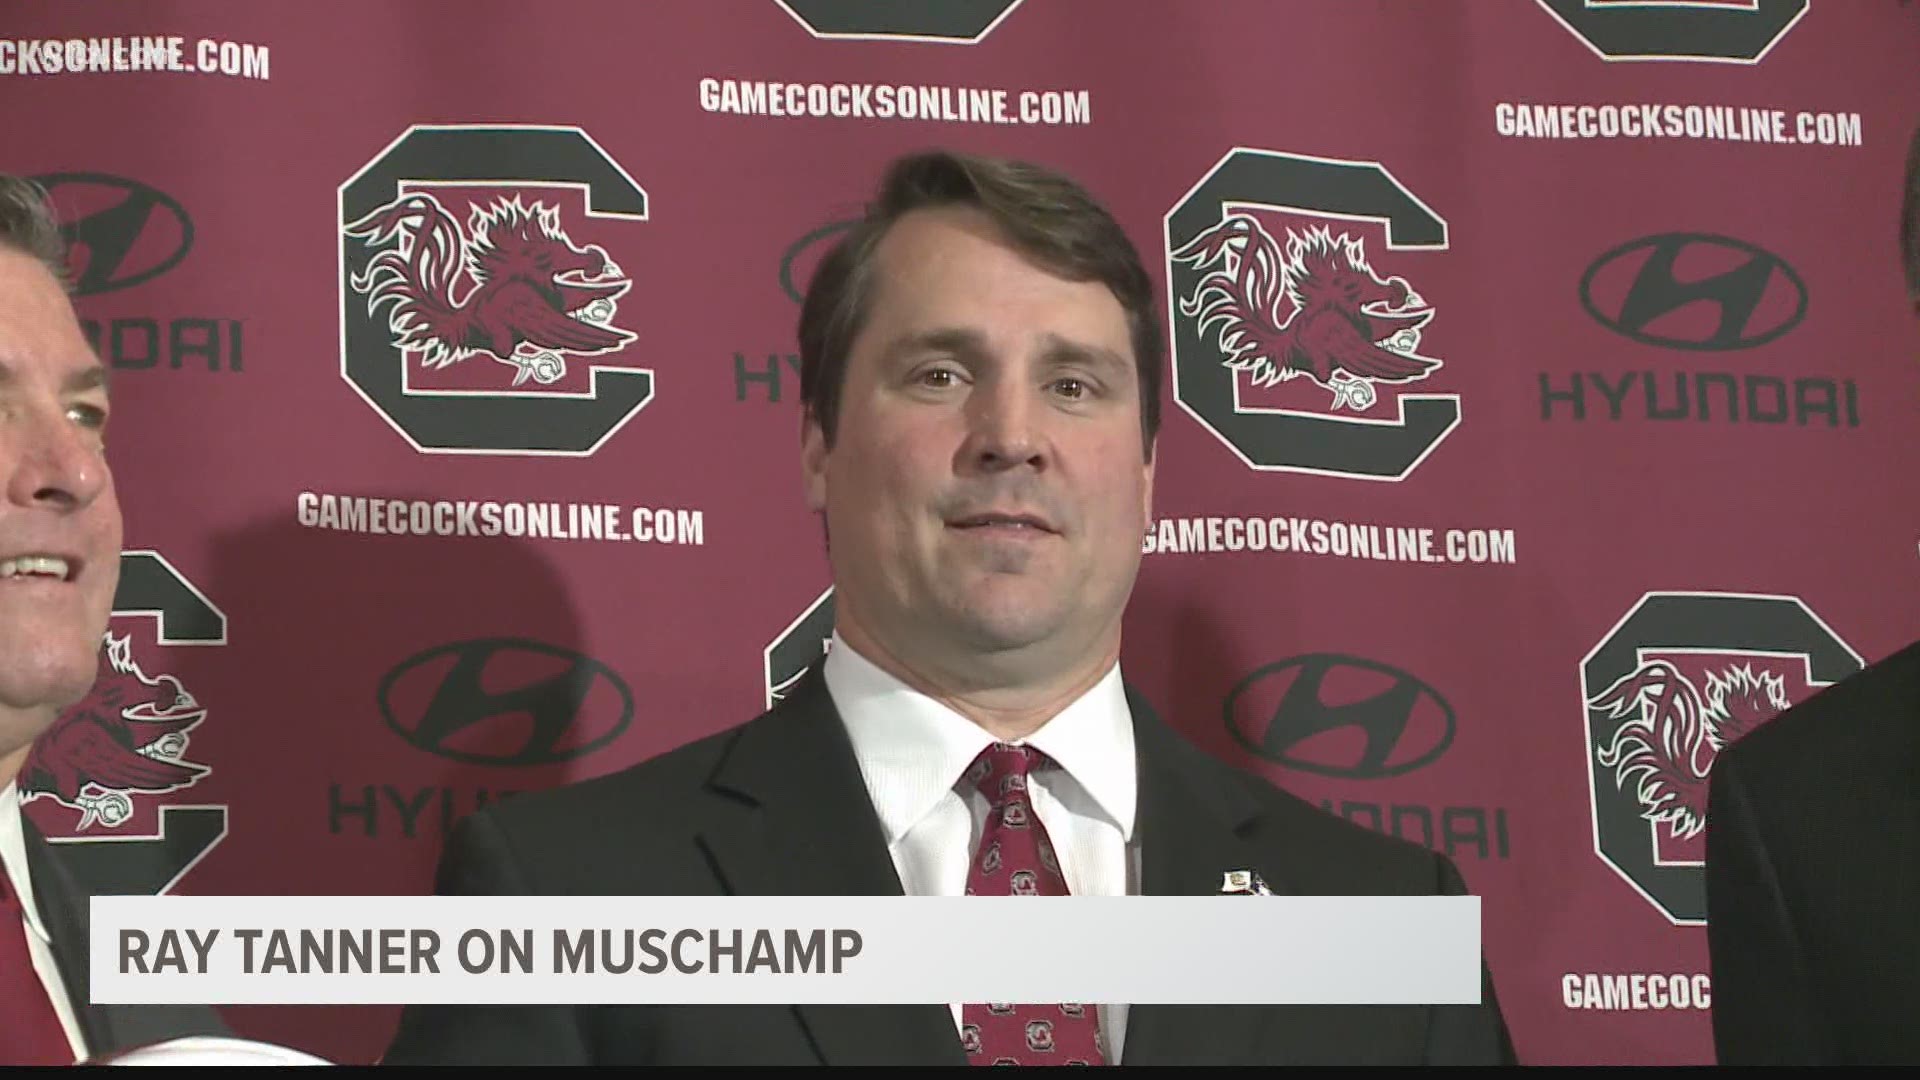 Will Muschamp is out as the coach of the South Carolina Gamecocks. Athletics Director Ray Tanner explains why the decision was made.